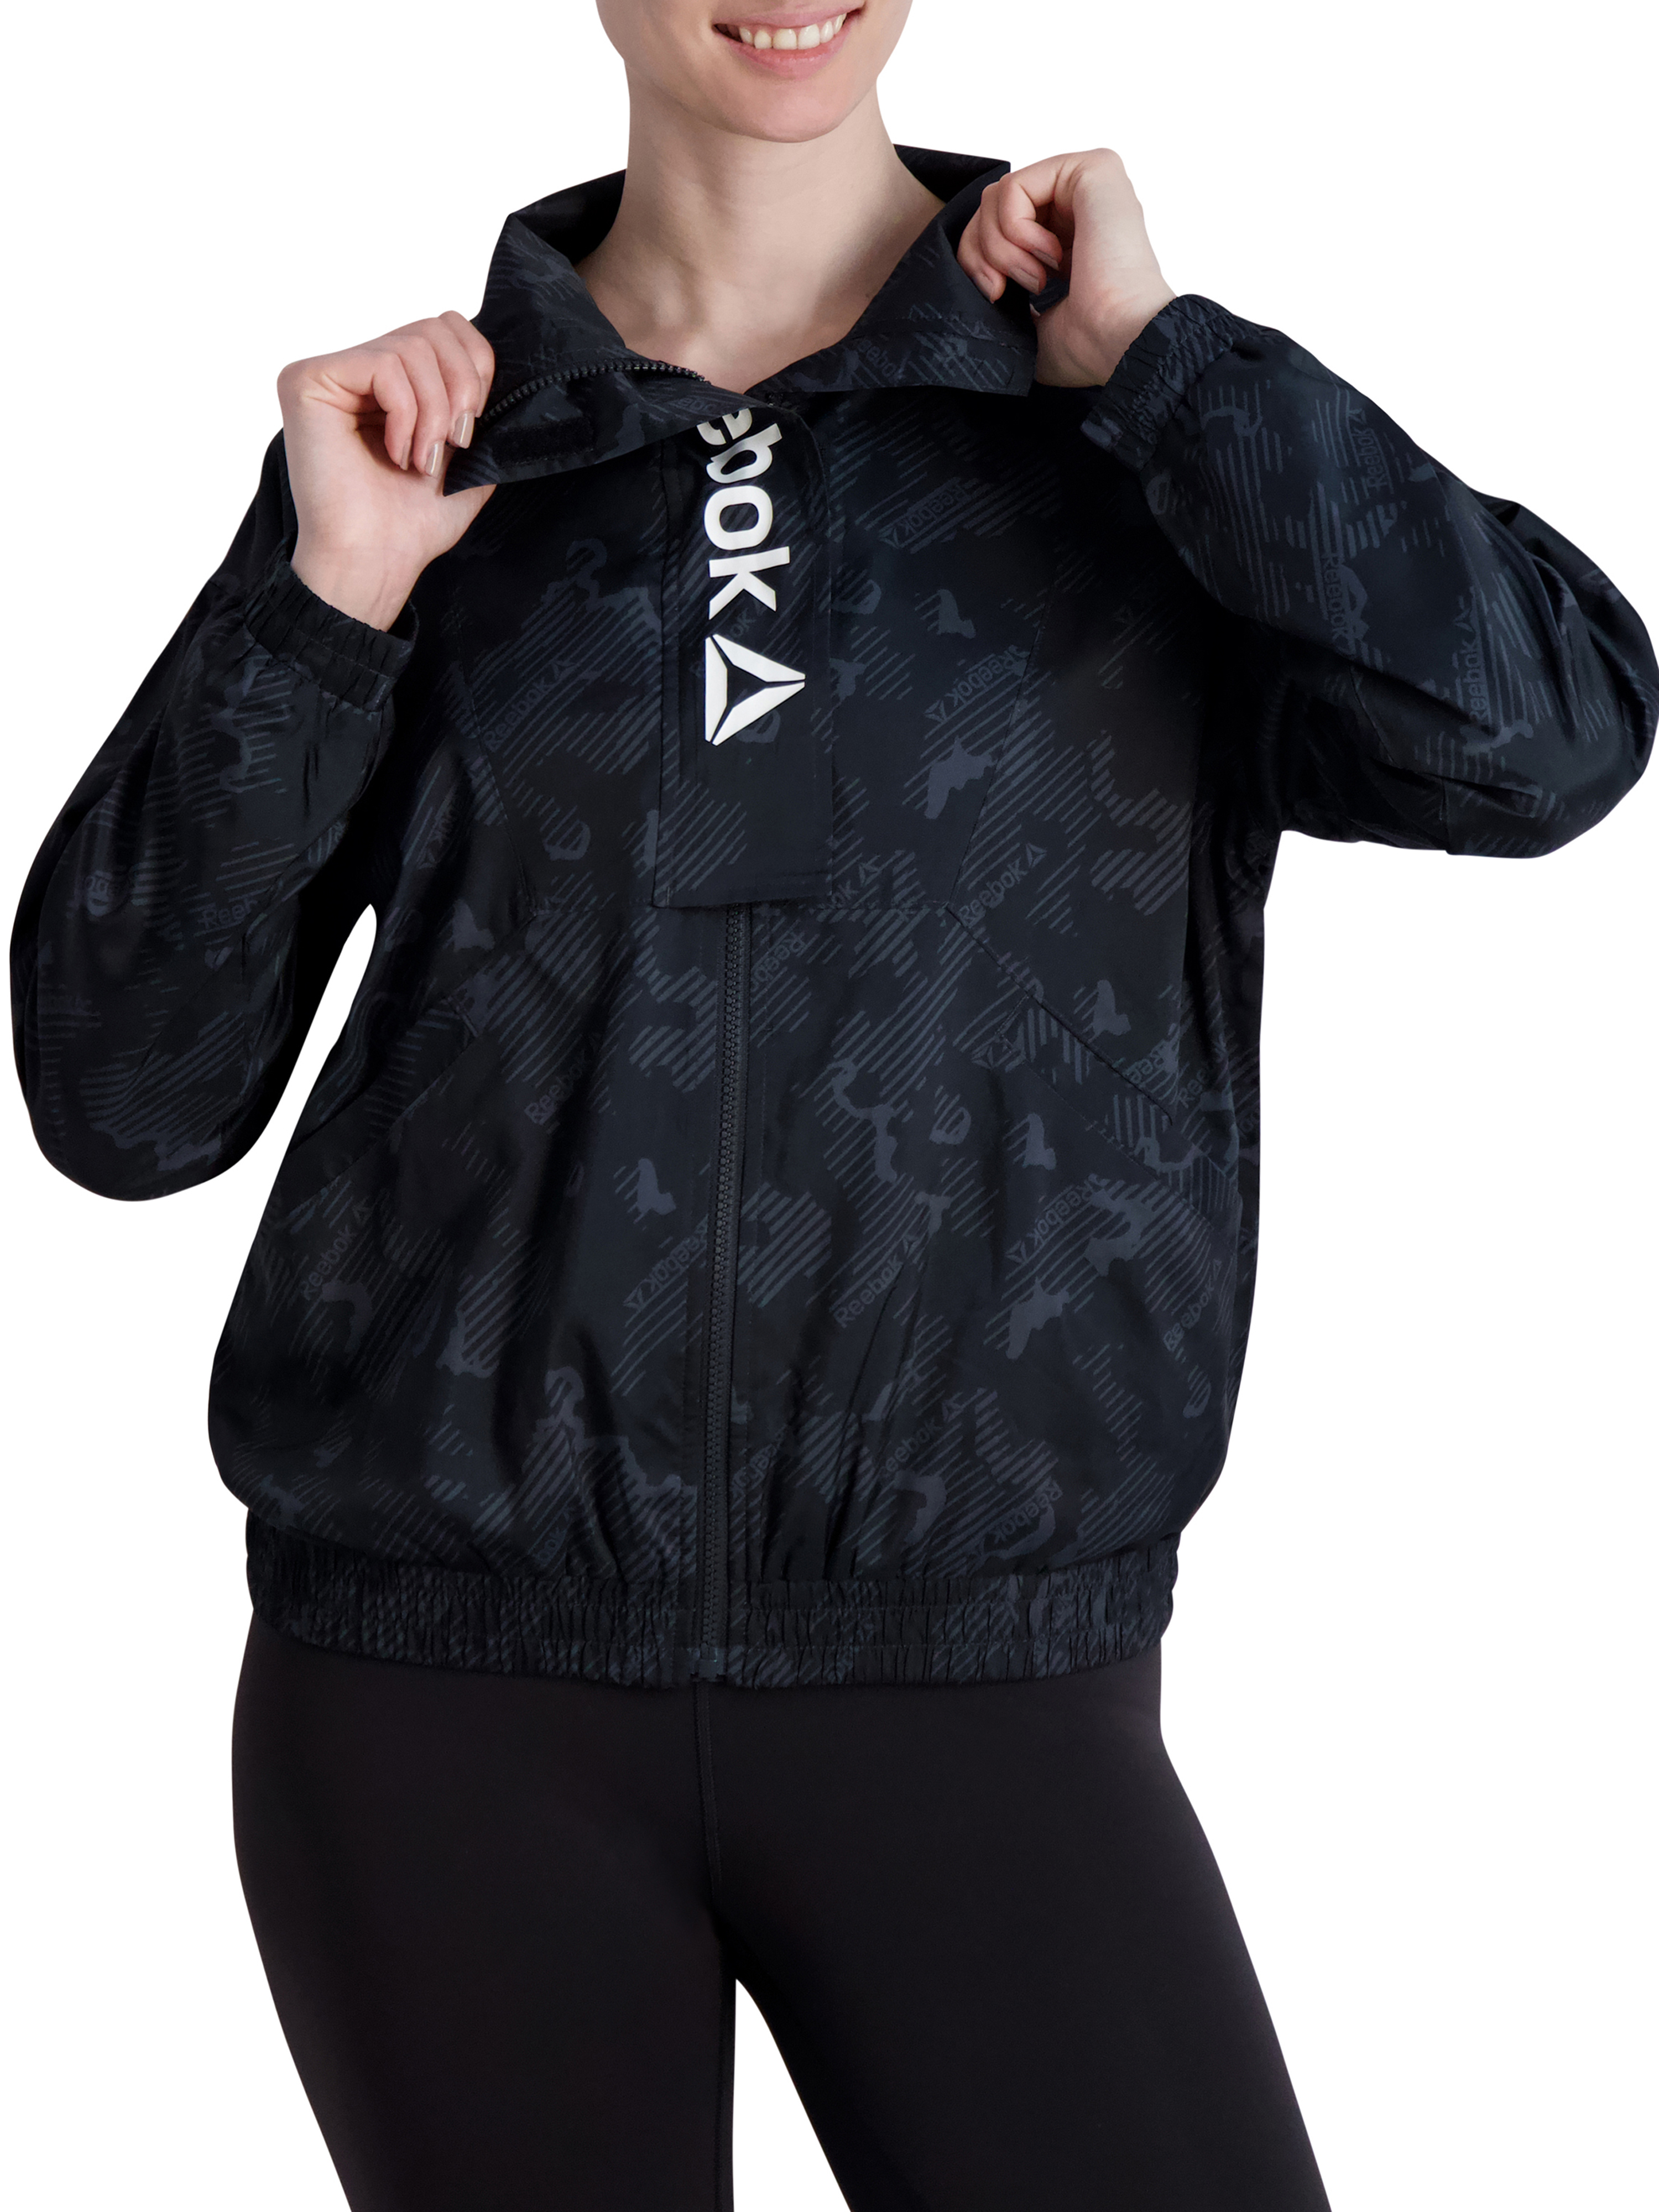 Reebok Women's Mesh Lined Printed Focus Track Jacket with Front Pockets and Front Flap - image 1 of 4